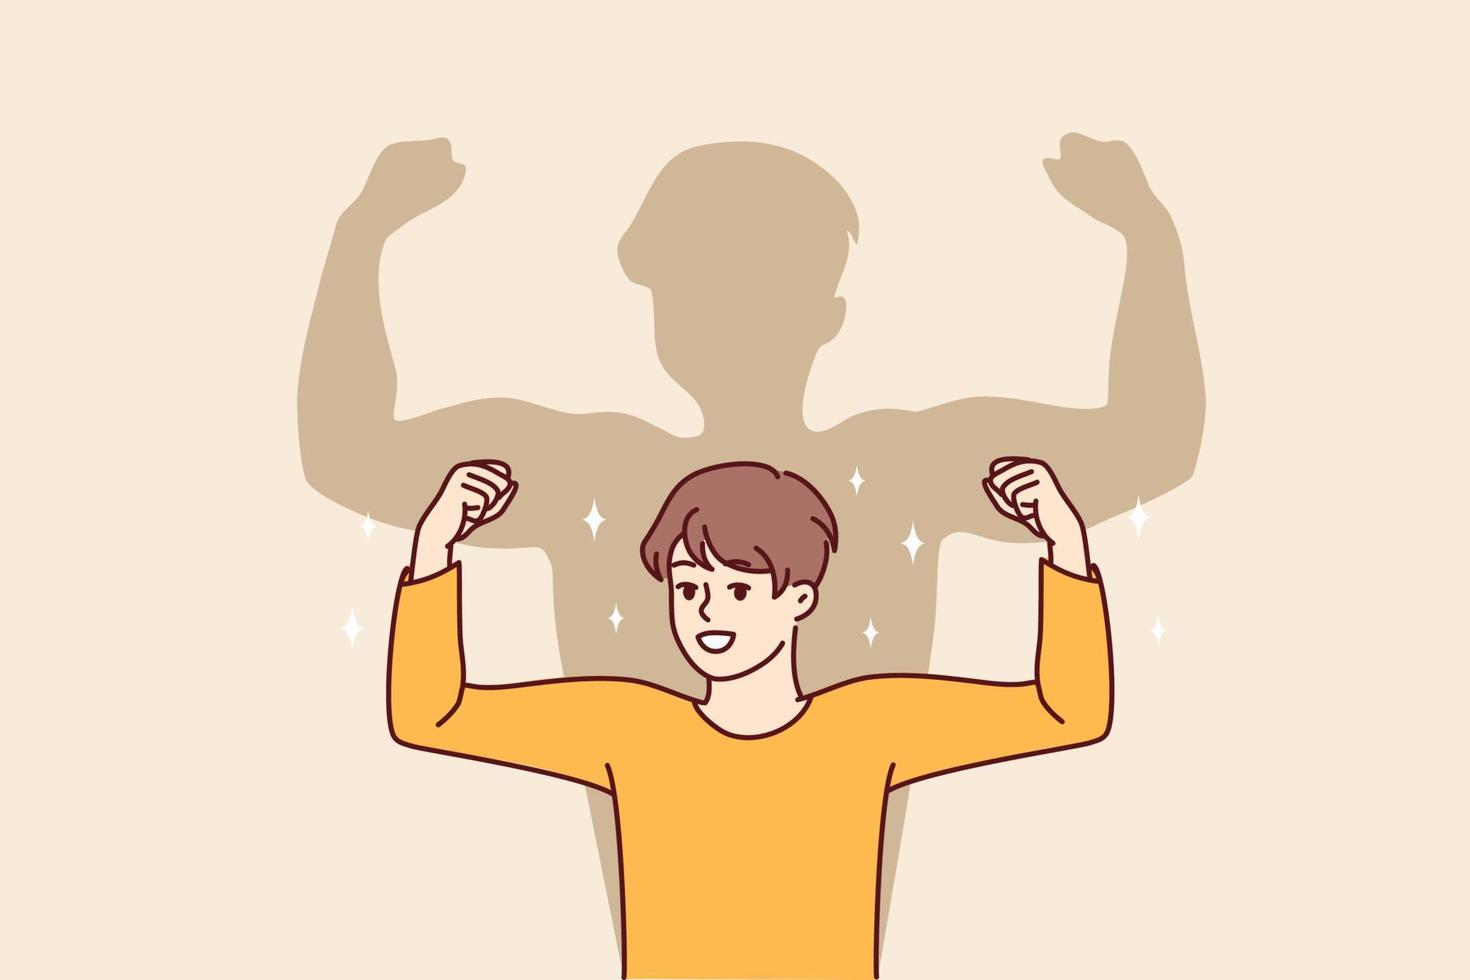 Smiling boy child show muscles dream of becoming big and strong. Happy kid imagine himself feeling strong and powerful. Vector illustration.